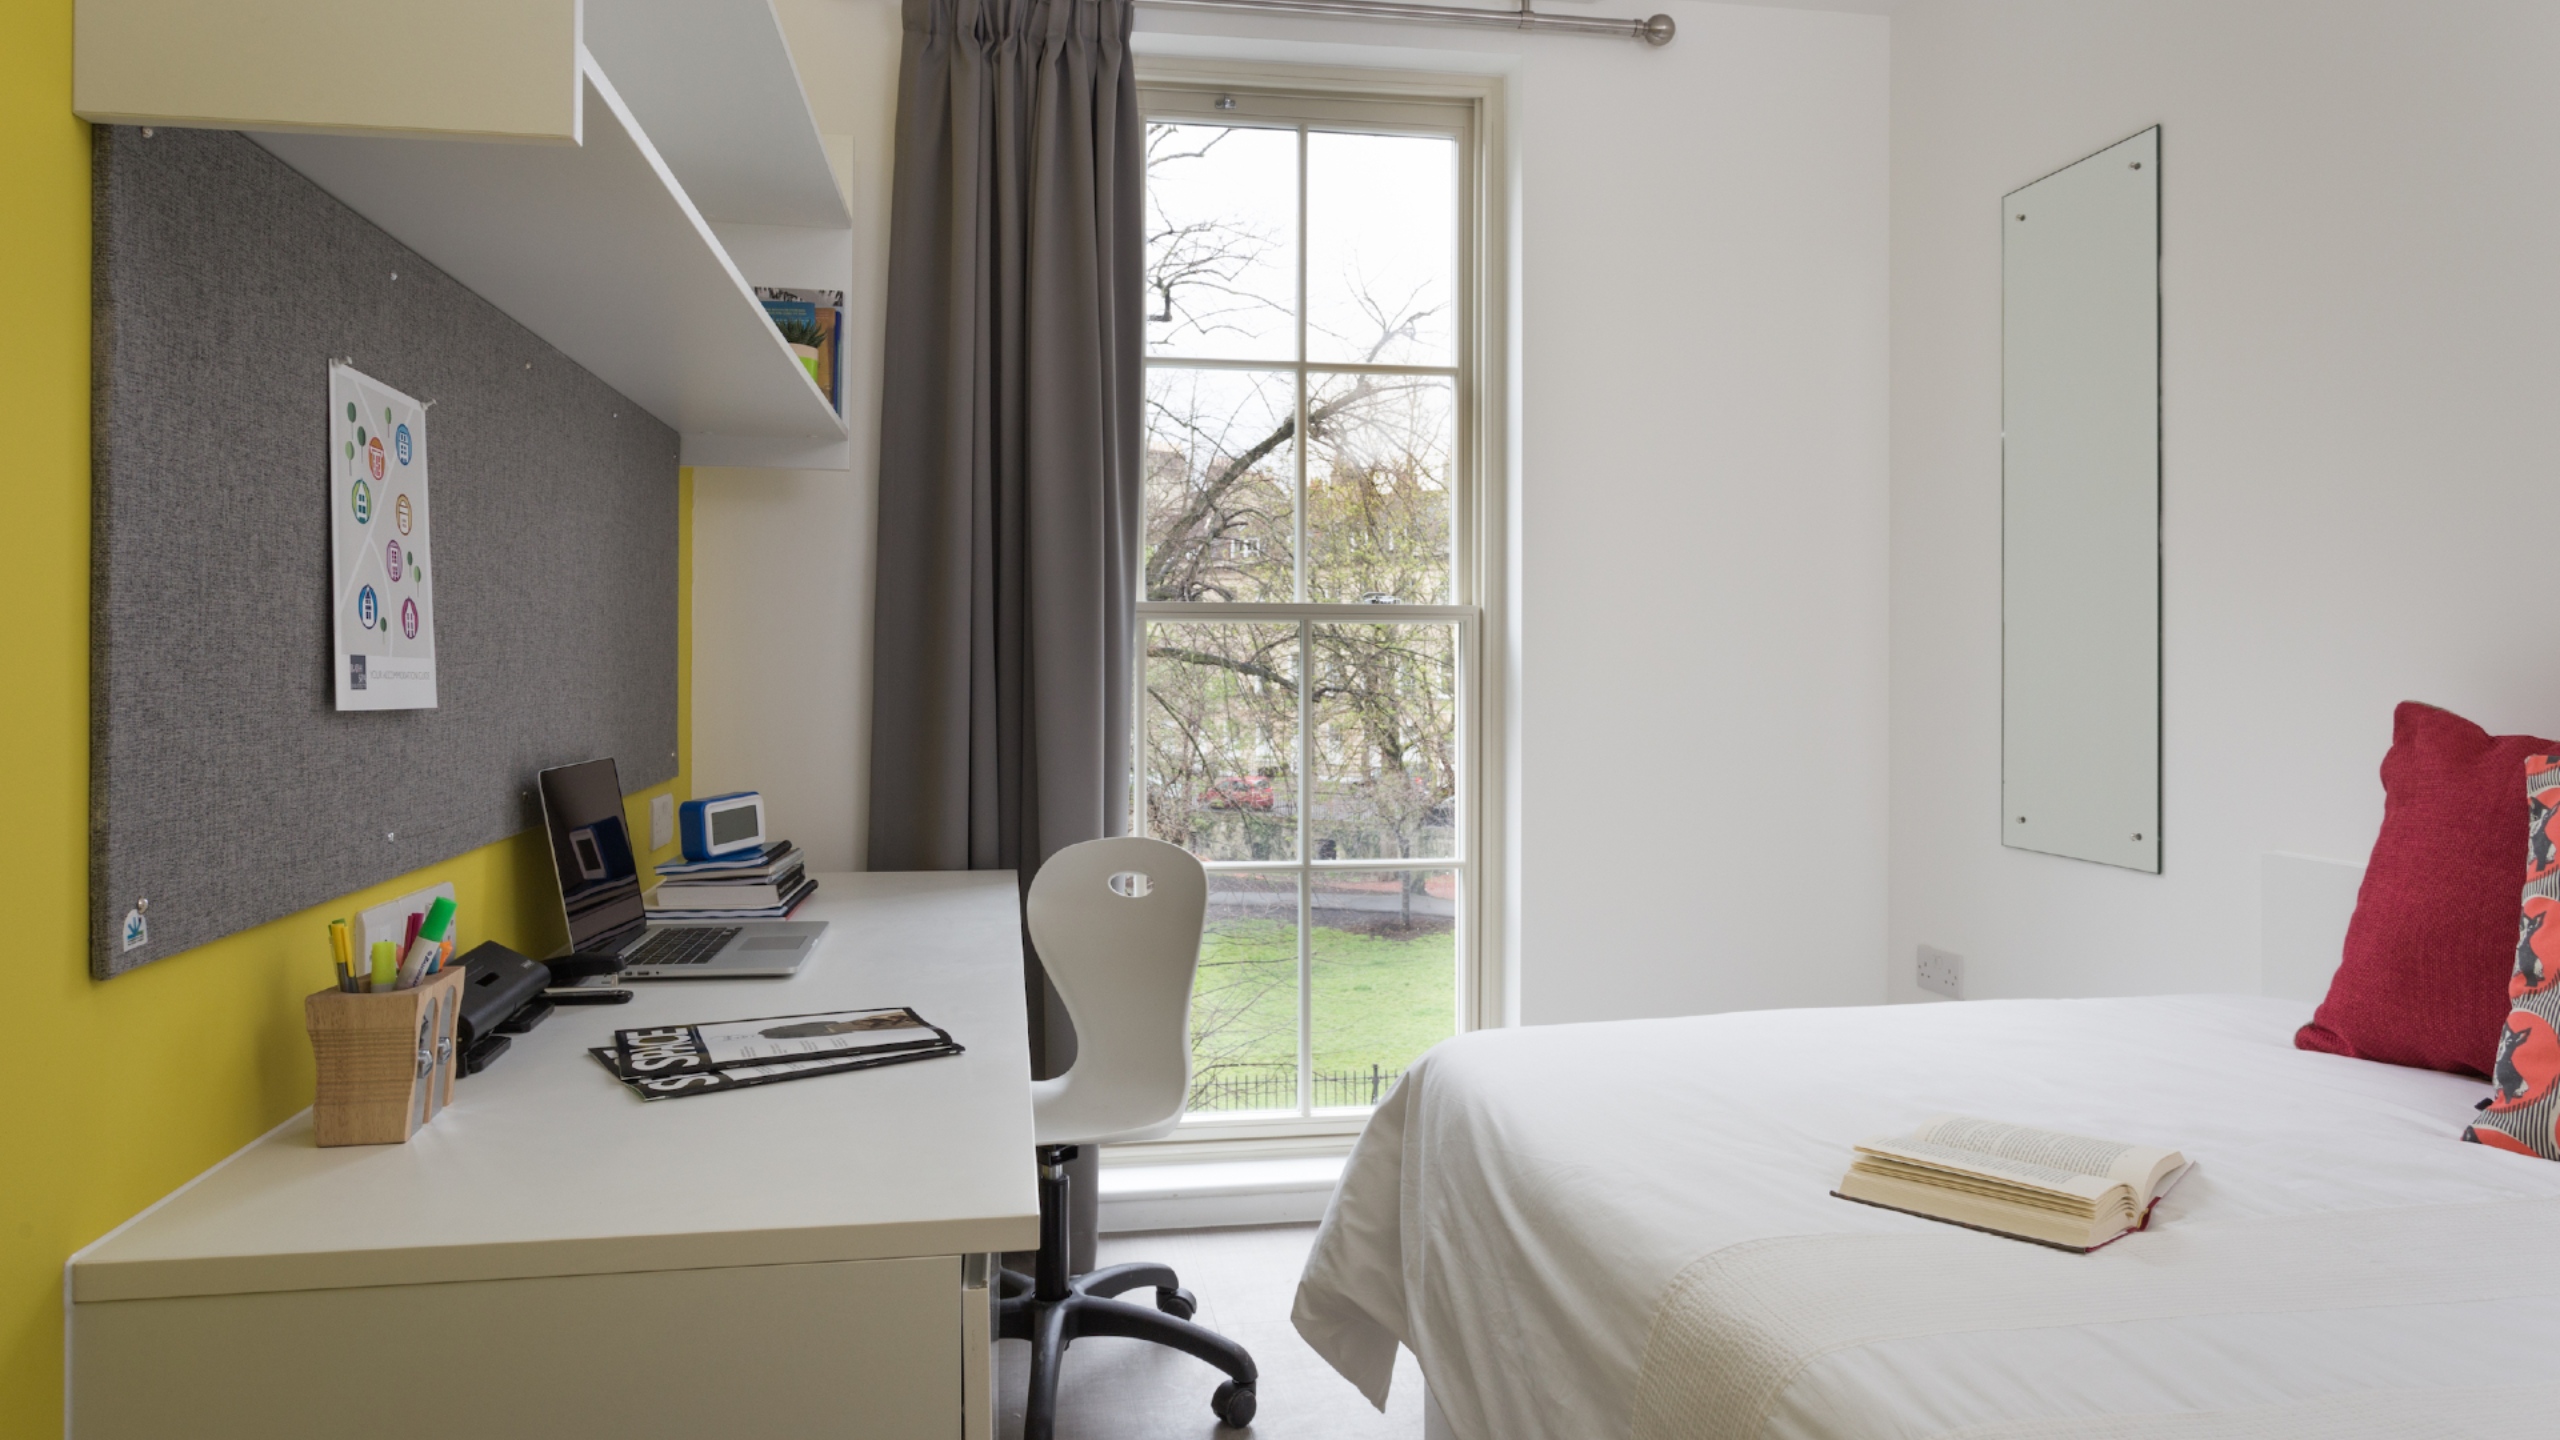 A bedroom at Green House Park with comfortable double bed and desk with chair